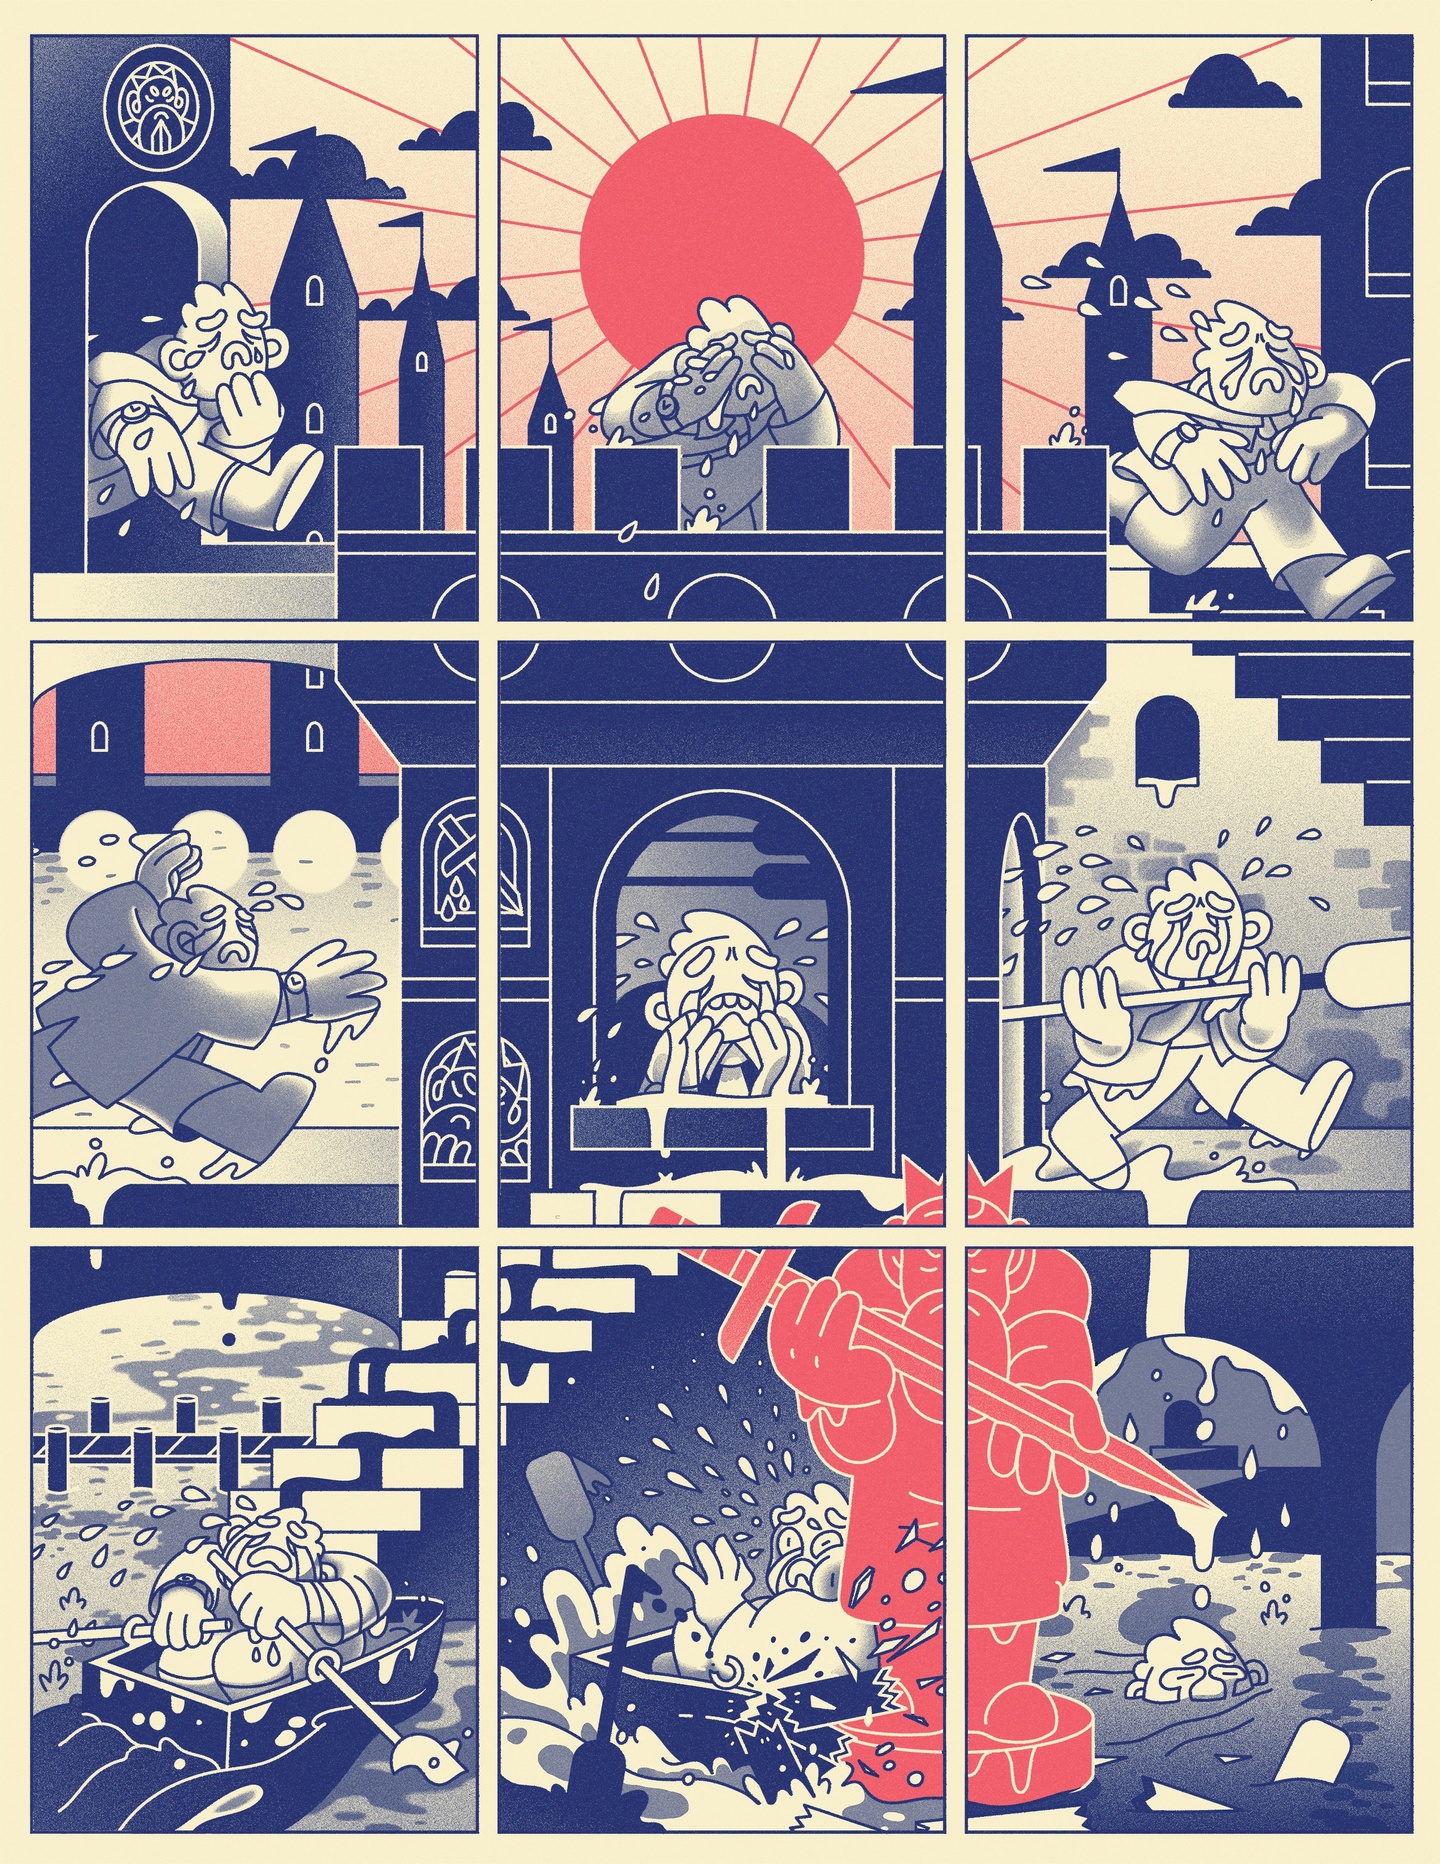 Single page comic in blue and pink depicting a cartoonishly weeping person running all through a castle from the battlements down into the dungeons.